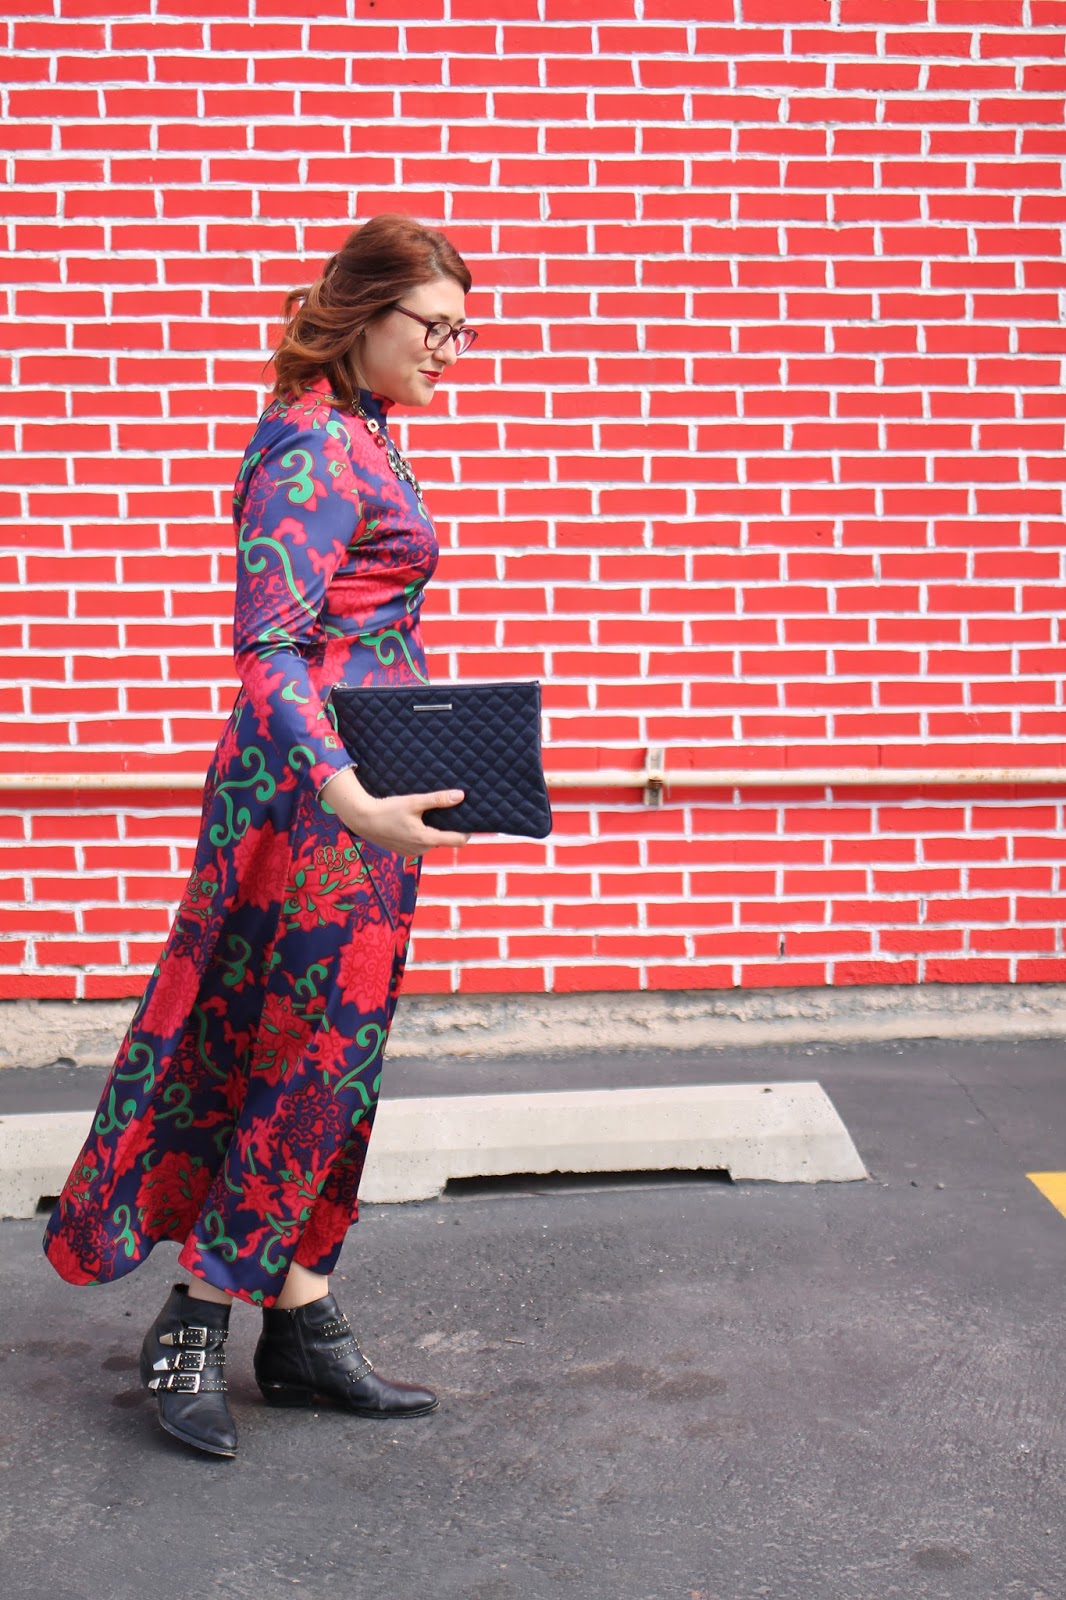 warby parker percy, Maxi dress, vintage dress, black booties,Rebecca Minkoff quilted clutch, utah fashion week, fashion show look